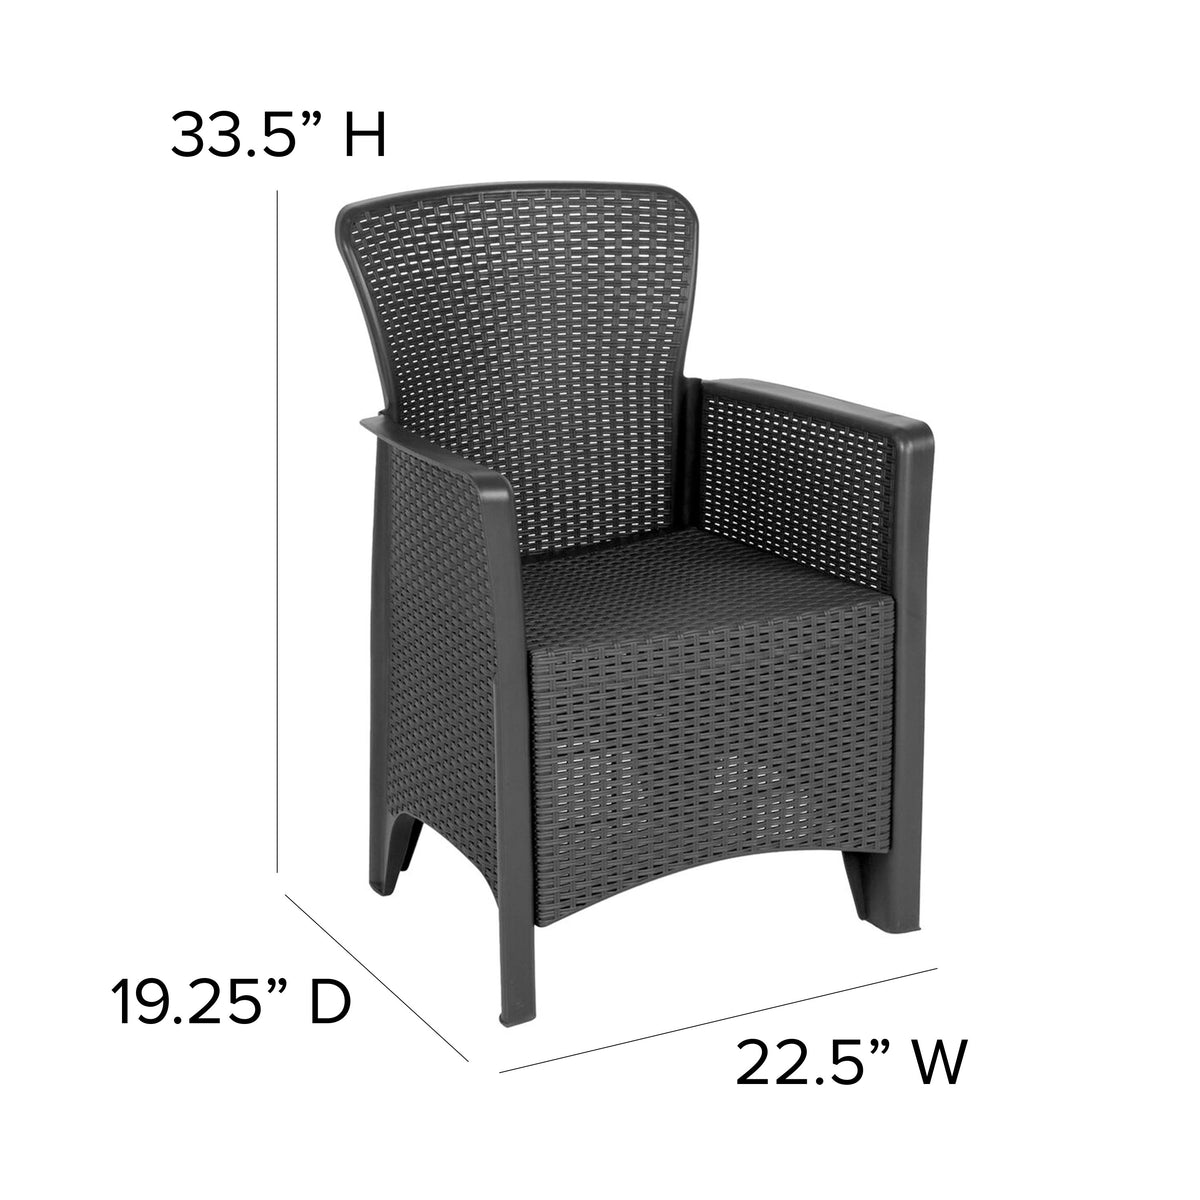 Dark Gray |#| Dark Gray Faux Rattan Plastic Chair Set with Matching Side Table - Patio Set